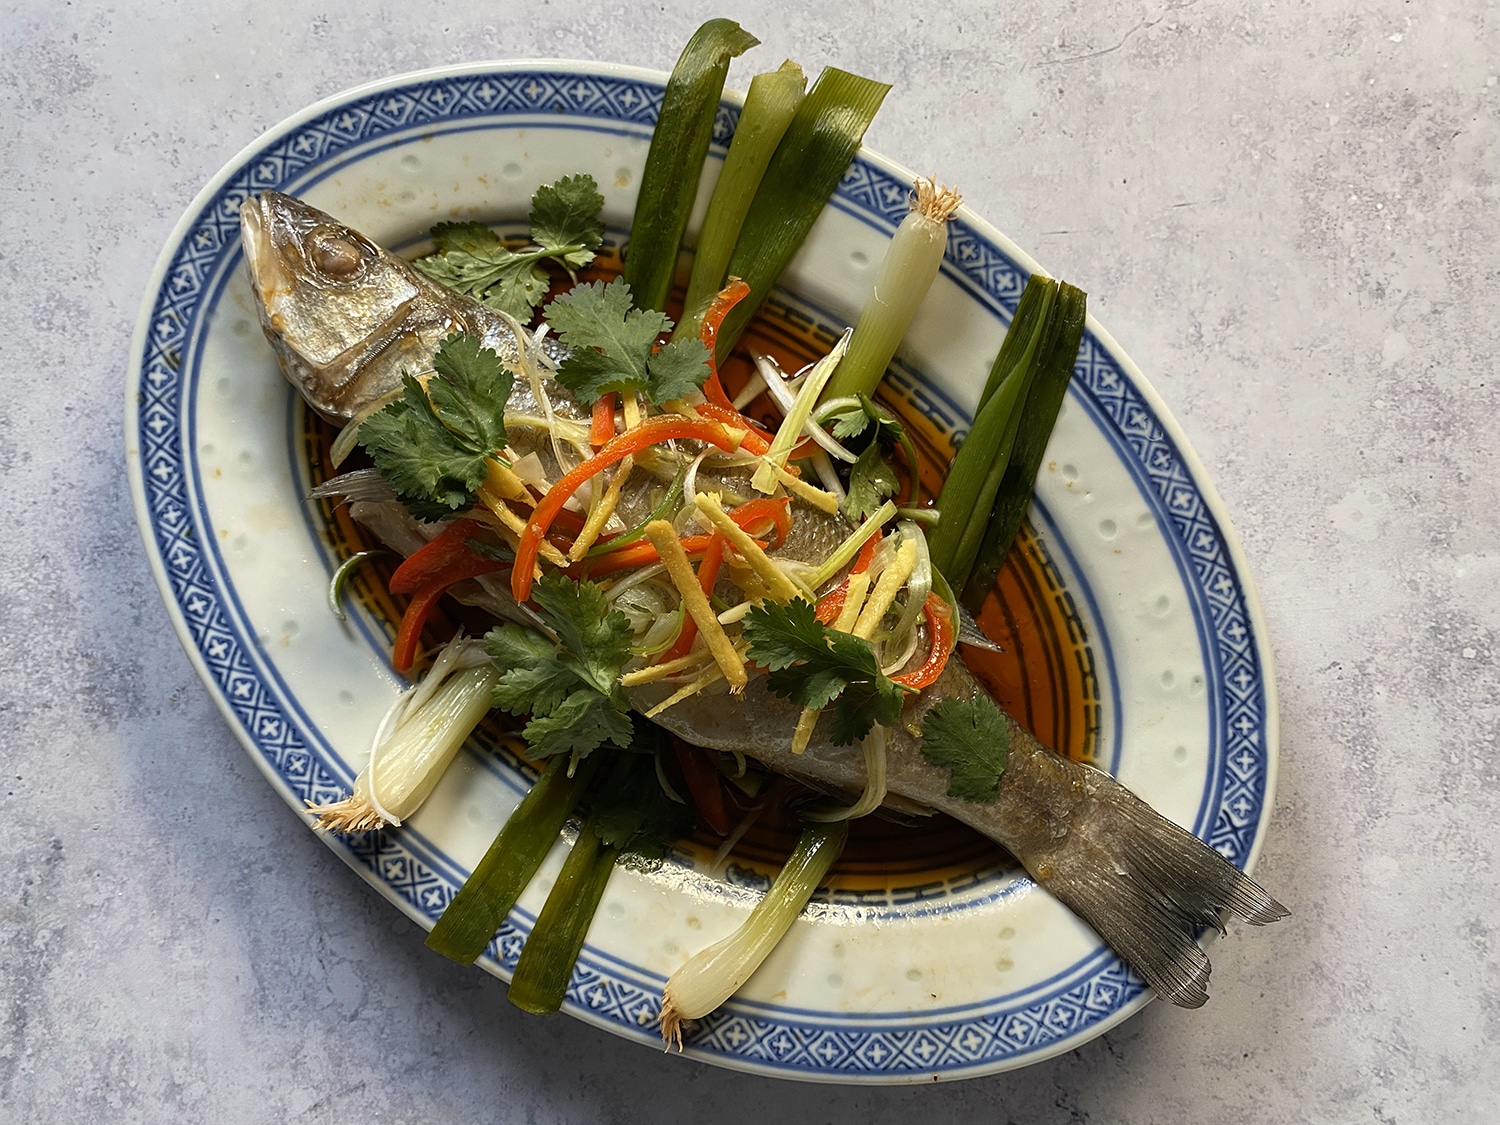 Lunar New Year steamed sea bass made from Borough Market ingredients